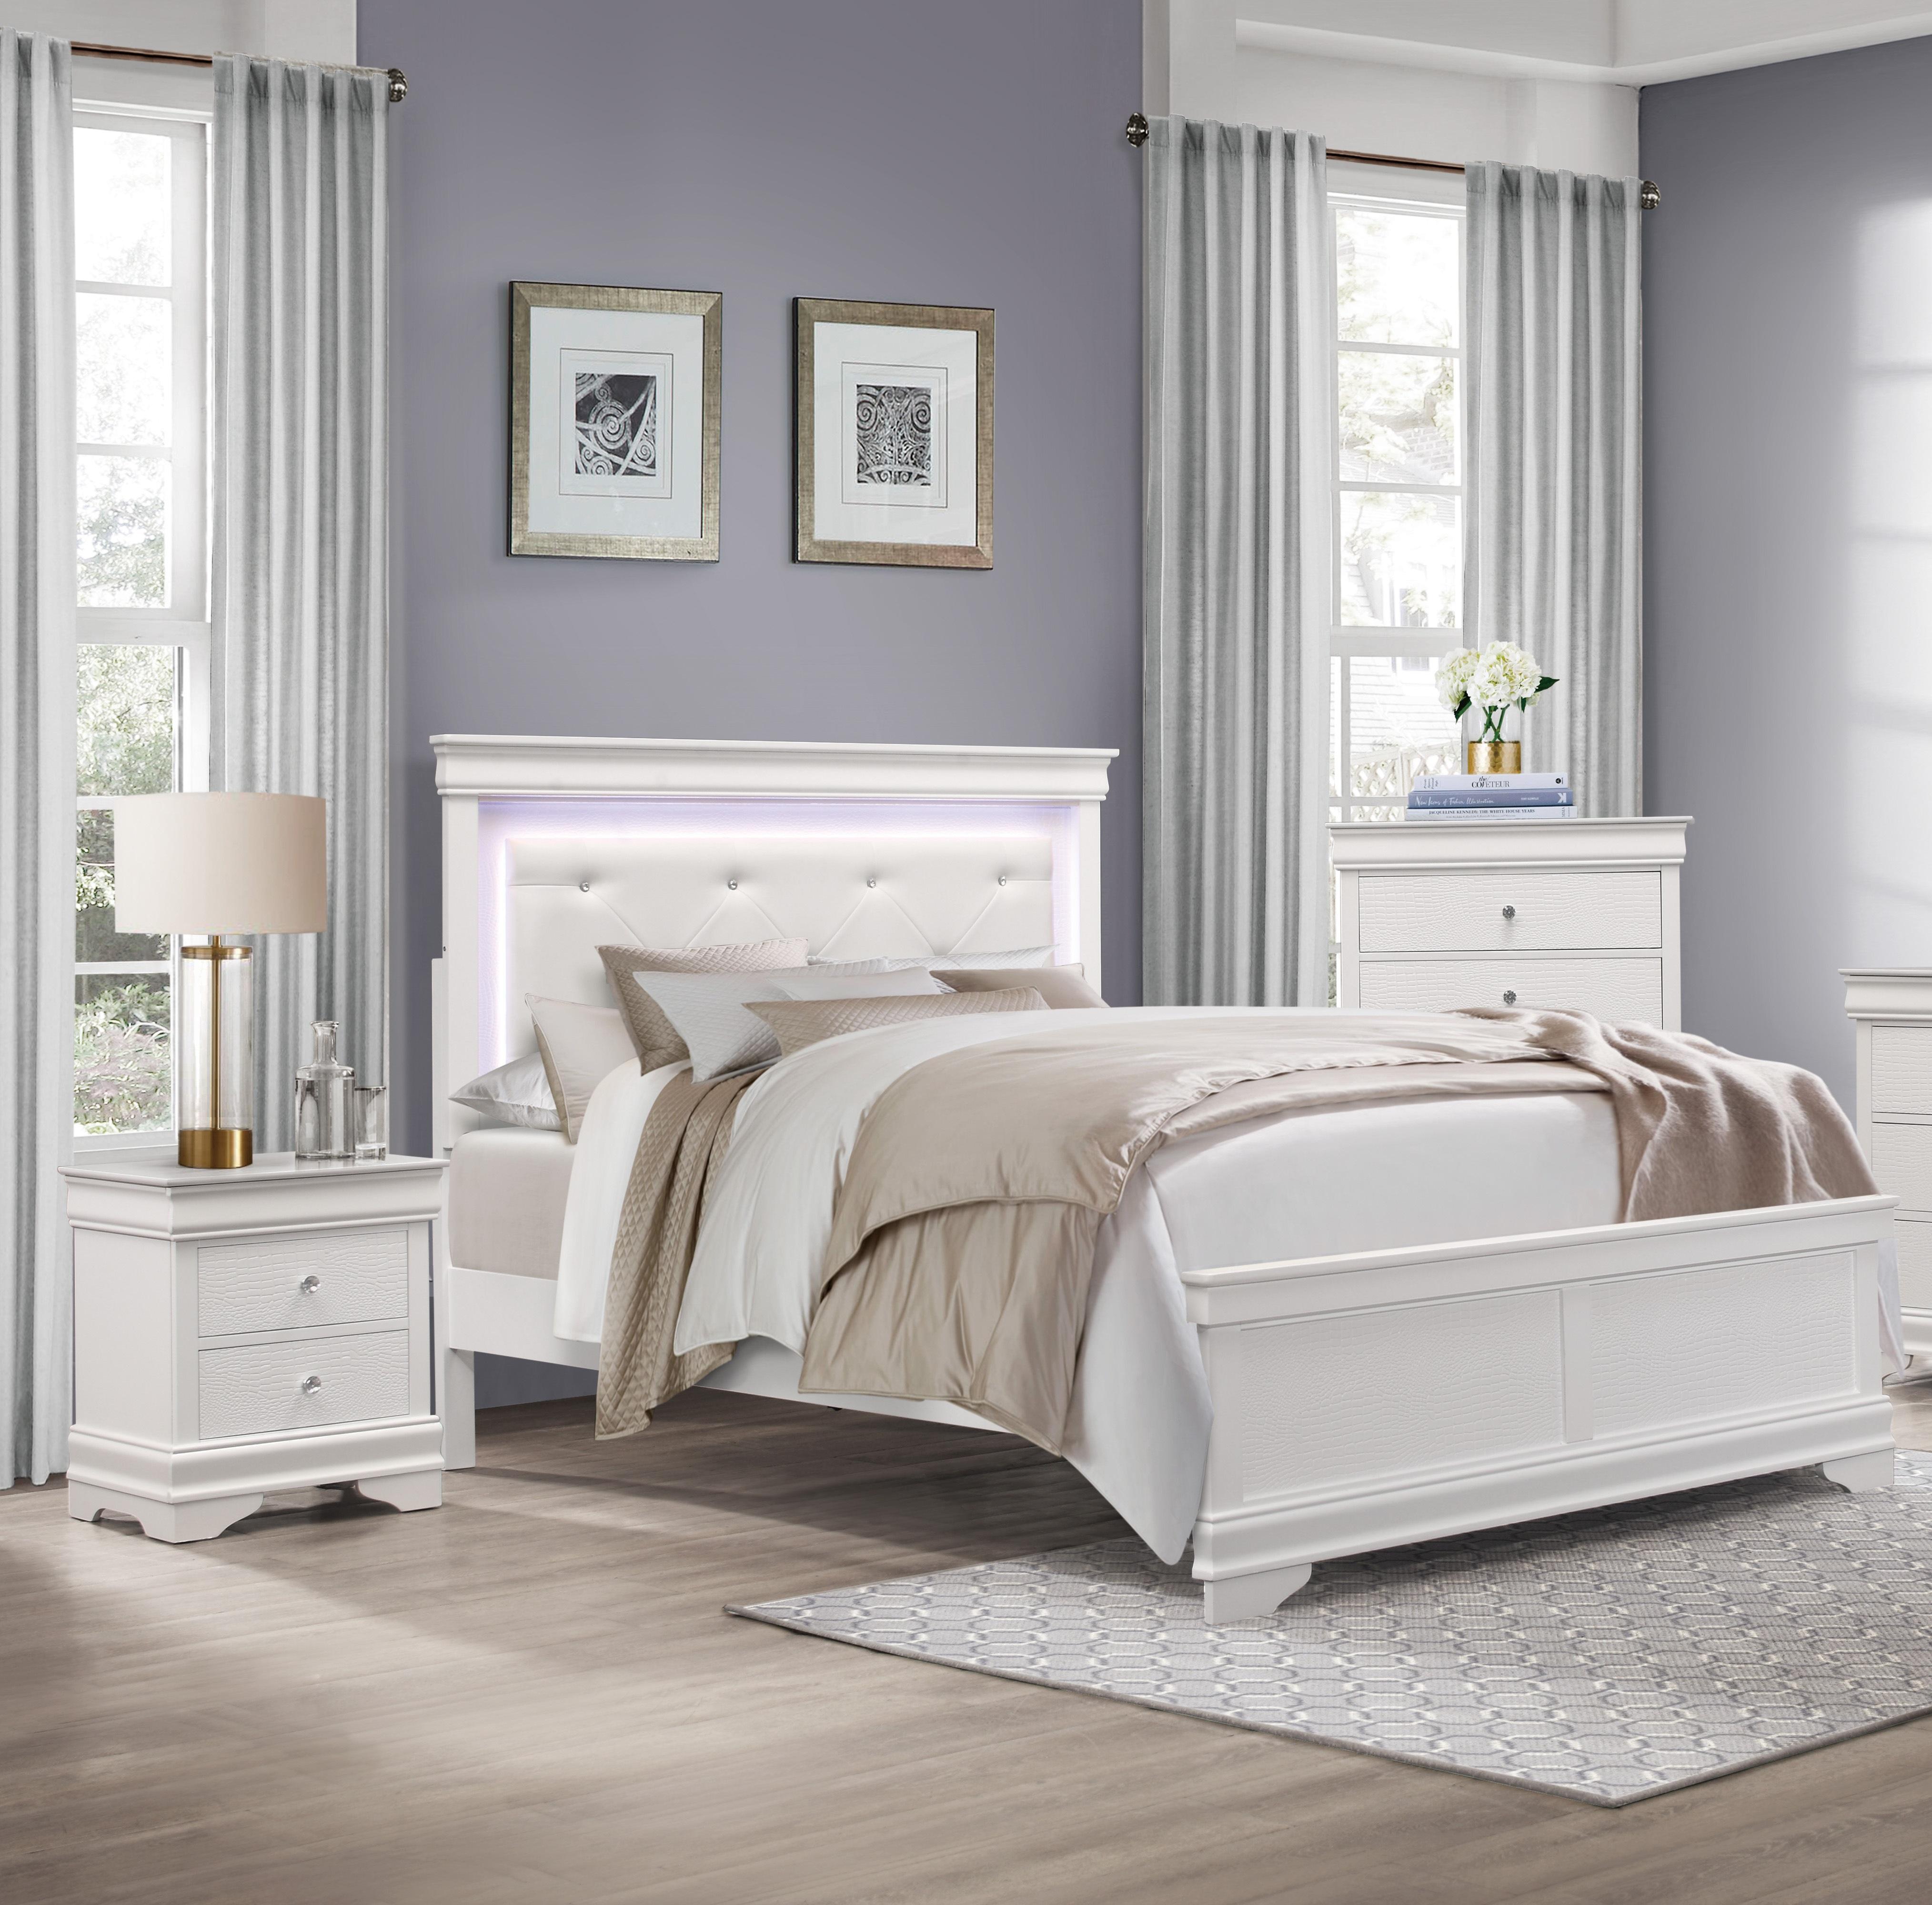 Traditional Bedroom Set 1556W-1-3PC Lana 1556W-1-3PC in White Faux Leather